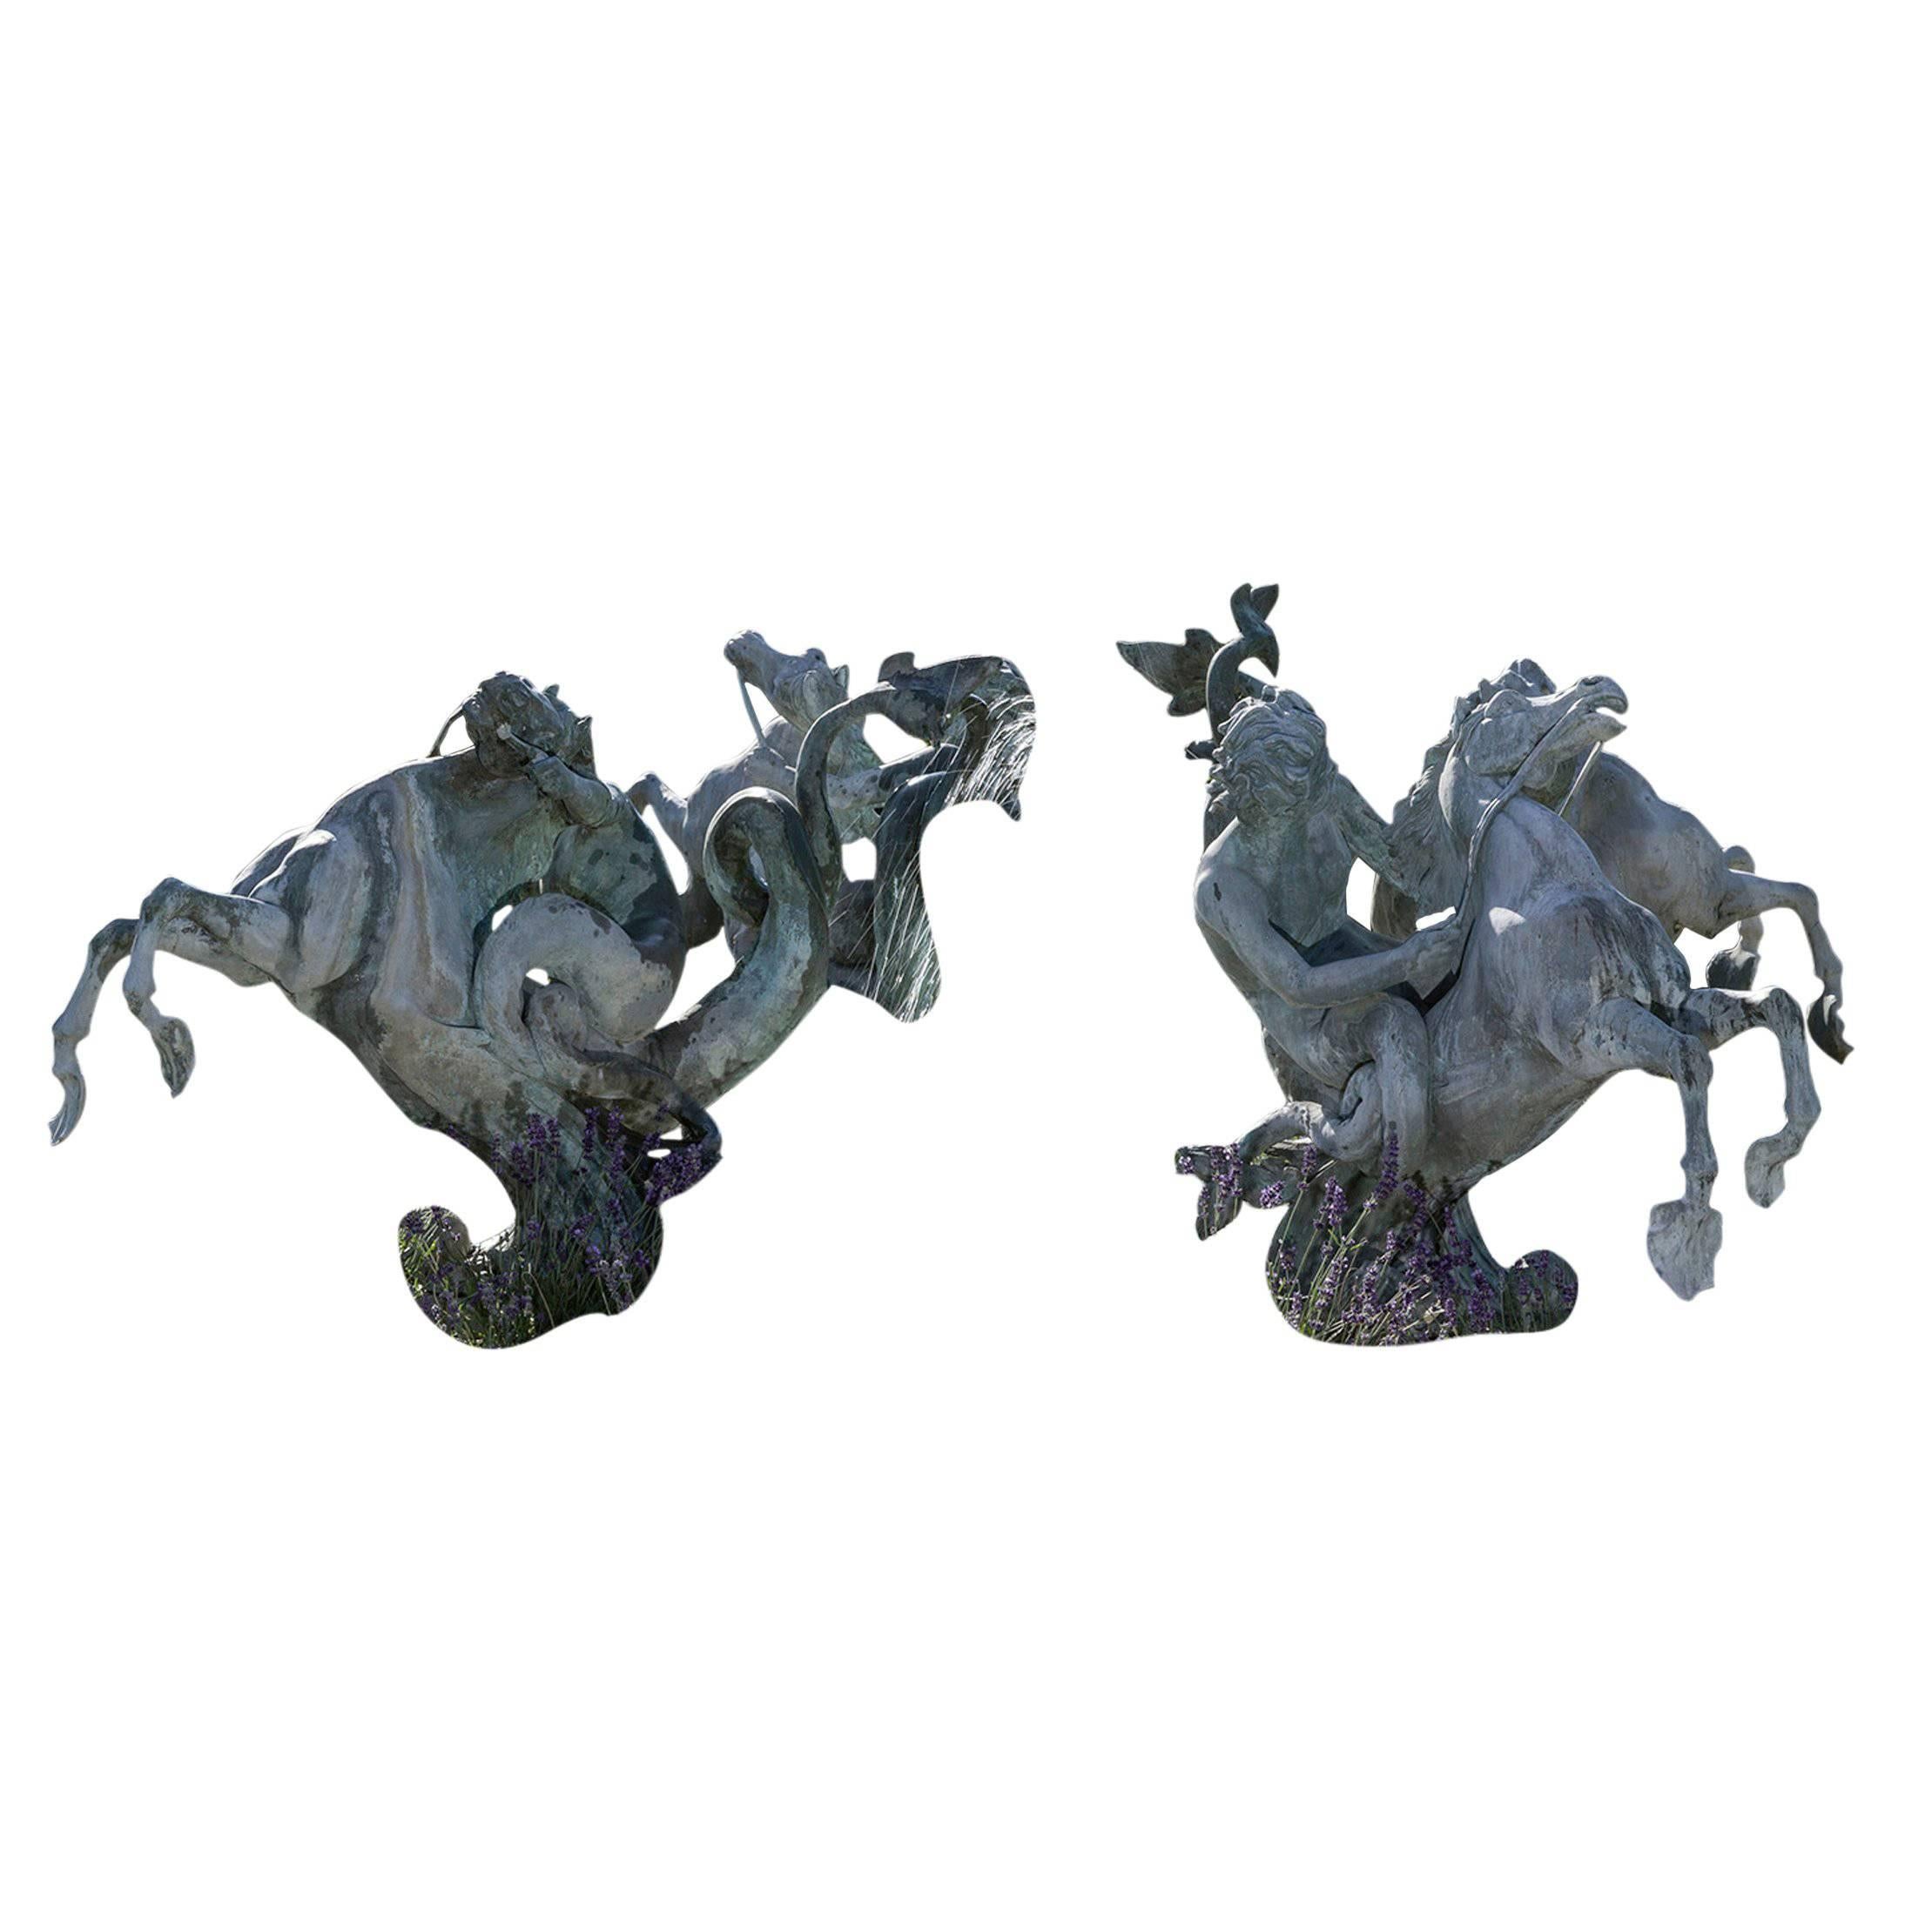 A very rare group of four bronze figures. The horses have a kind of a tail and also all the figures on the horses.
They are in a wonderful quality and original.
This historical palace or castle fountain has an exceptional expression.
In the centre